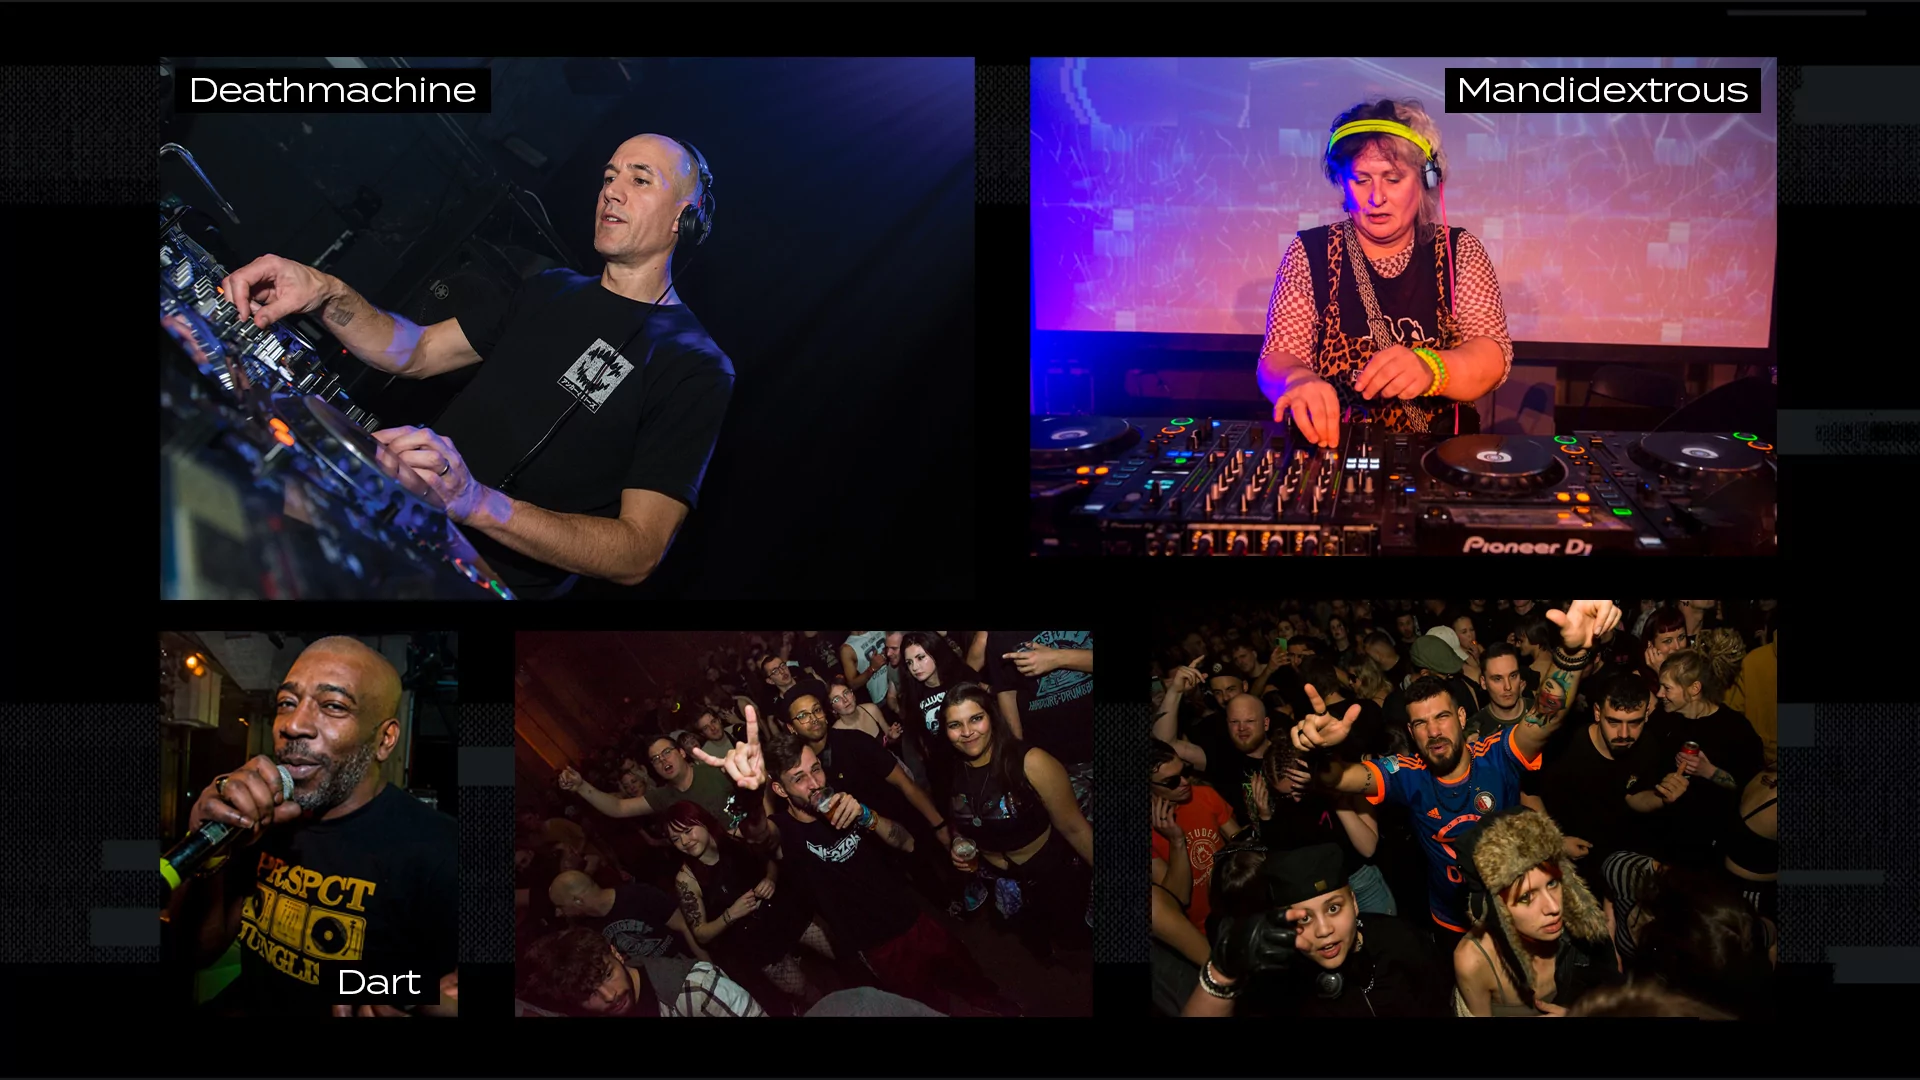 Five photos on a black and white background. At the top, photos of Deathmachine and Manditextrous DJing at a PRSPCT event. At the bottom left, a photo of Dart MCing next to two busy crowd shots